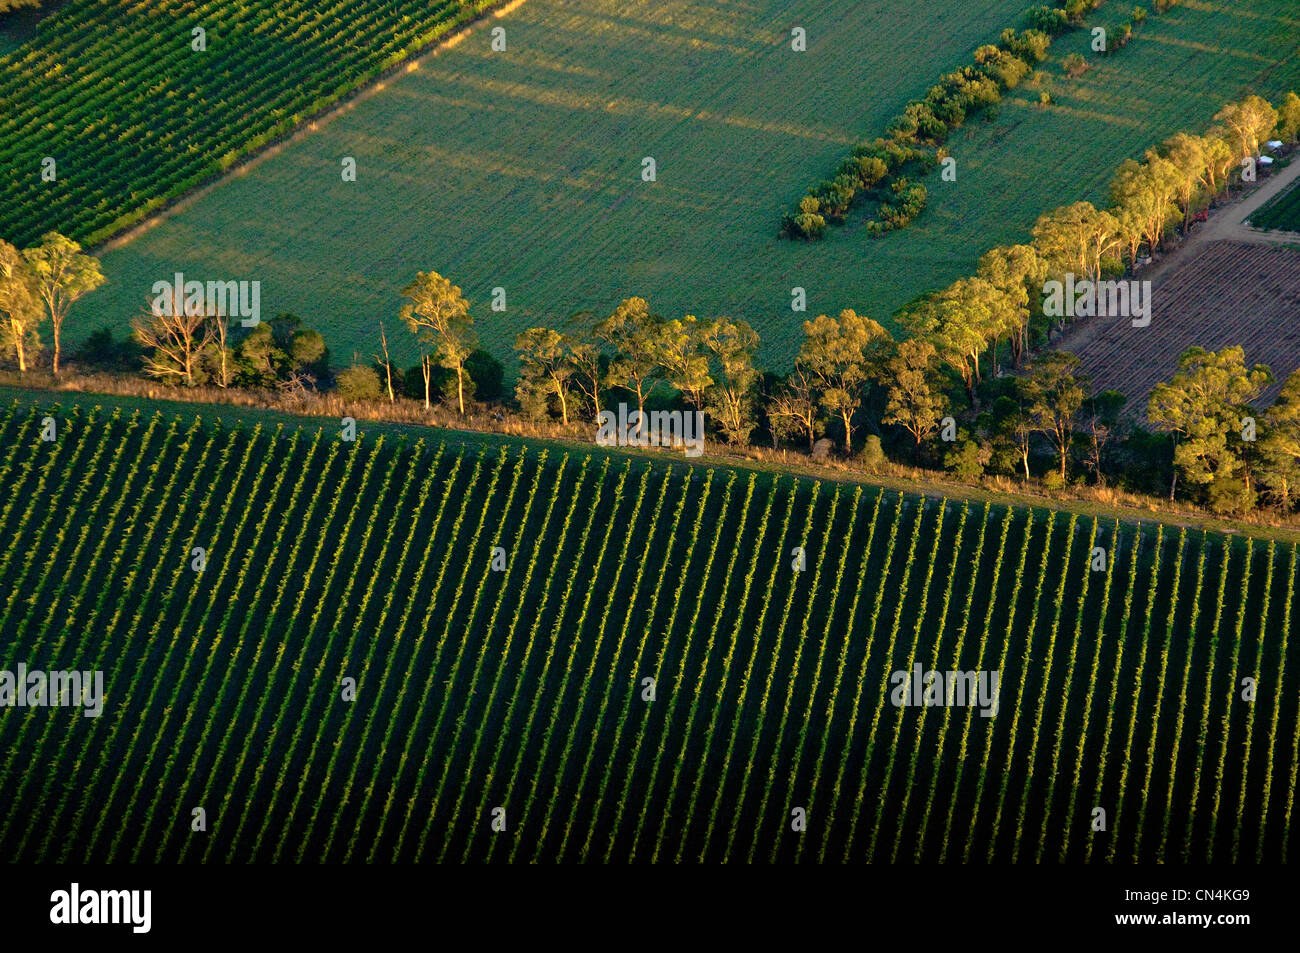 Australia, Victoria, wine-producing region of Yarra Valley at north east of Melbourne, landscape seen from hot air ballon Stock Photo